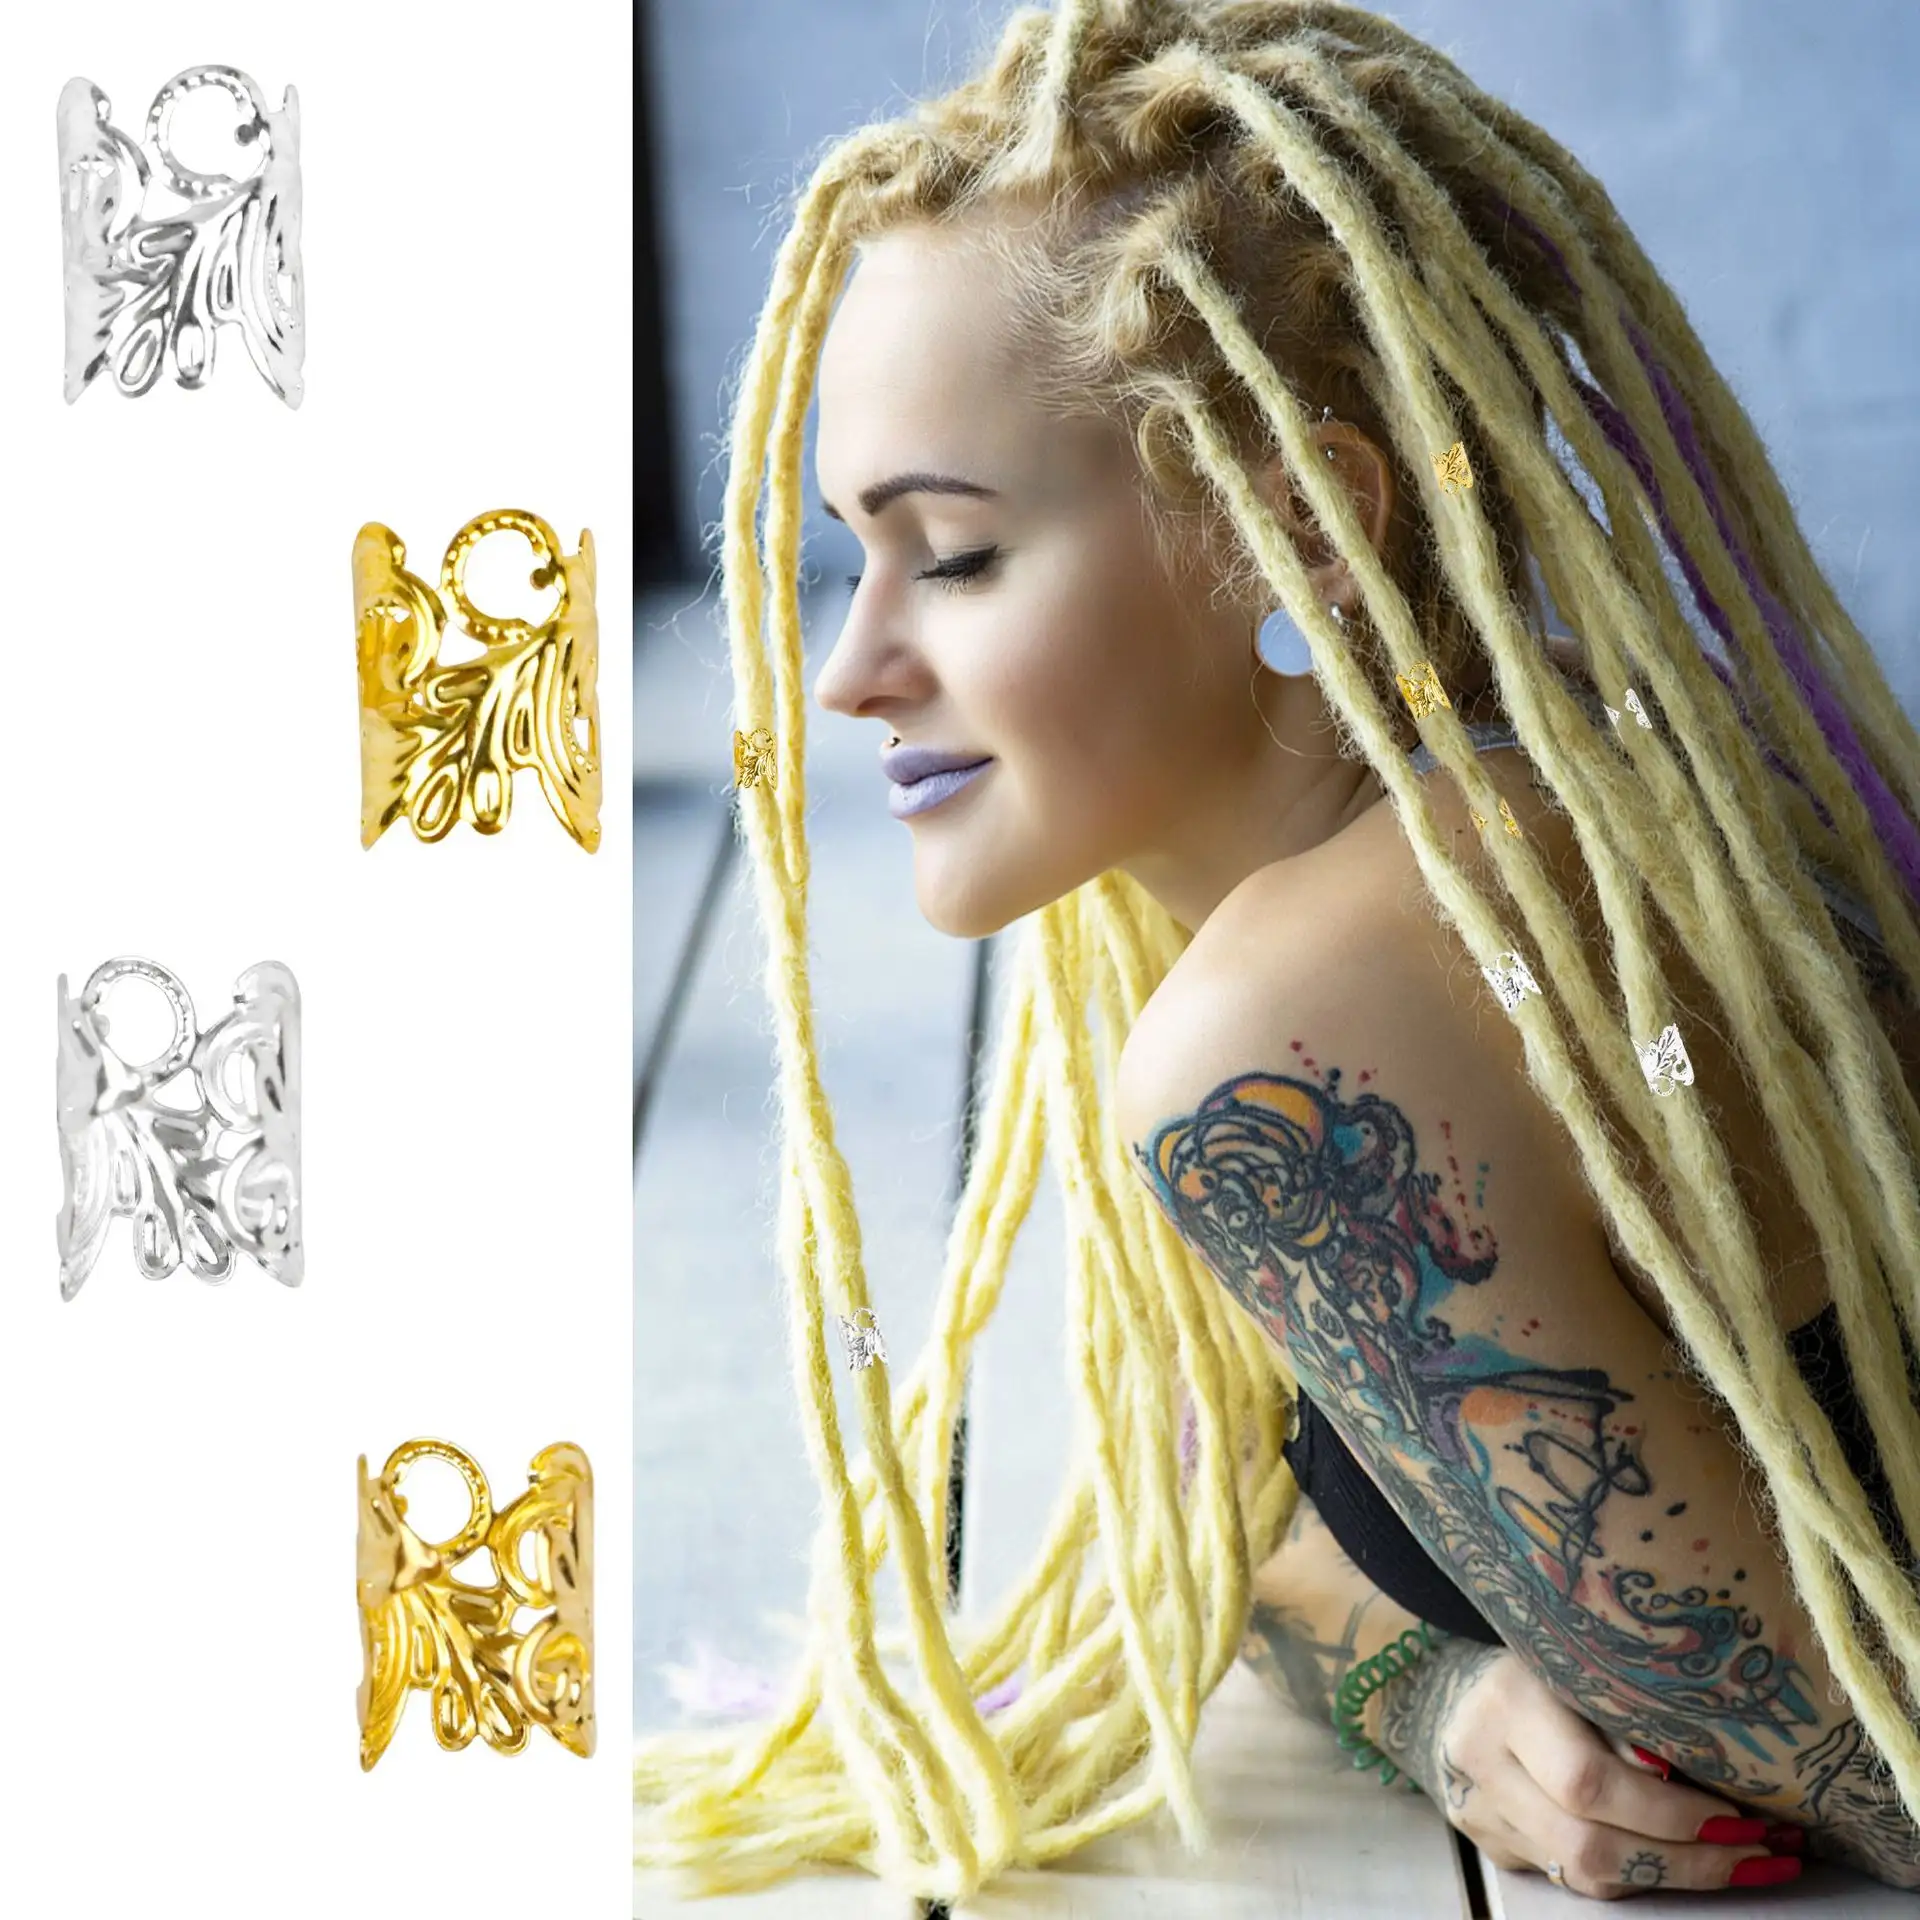 Mixed Braid Mixed Colors Adjustable Styling Metal Cuffs Clip Jewelry Beads Dreadlocks Tubes Decoration Hair Rings Extension